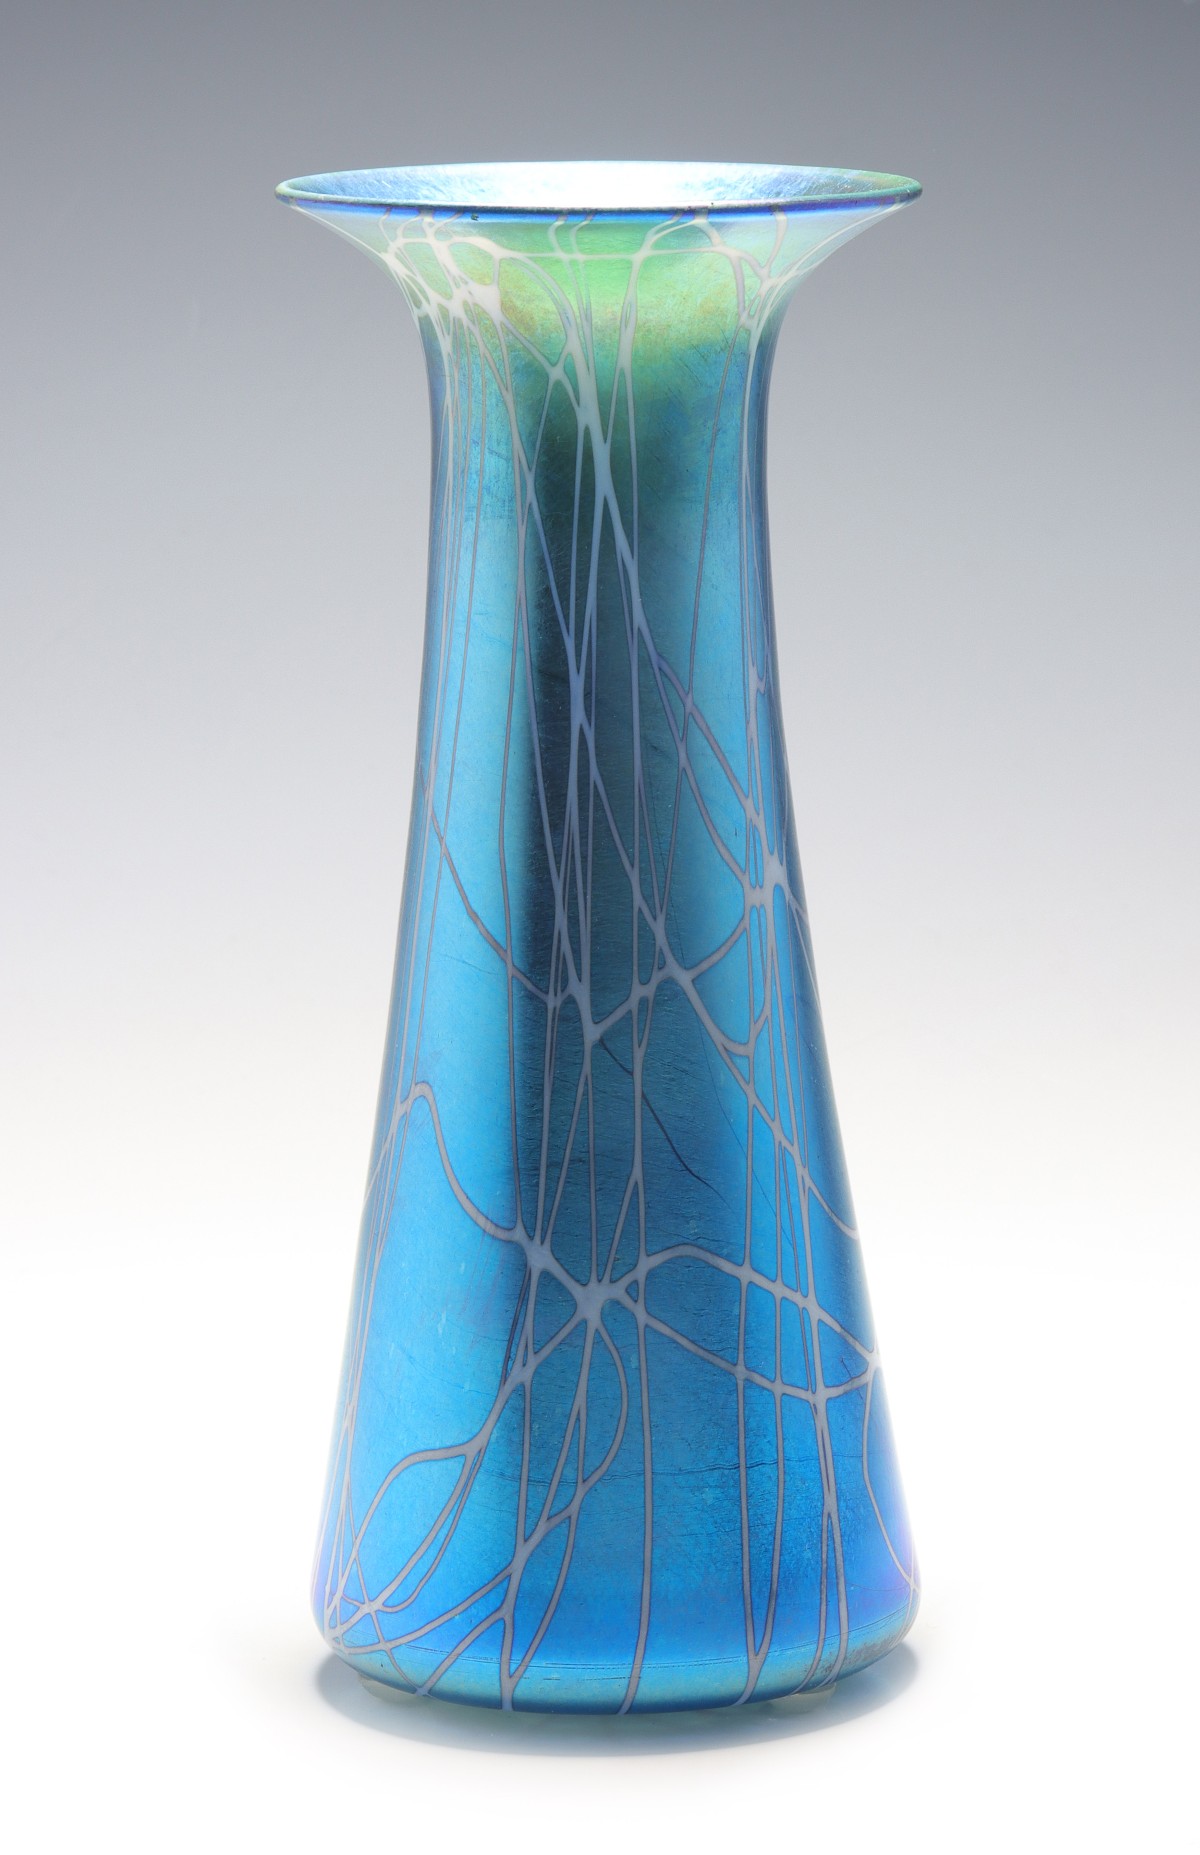 A BLUE DURAND ART GLASS VASE WITH WHITE STRINGING